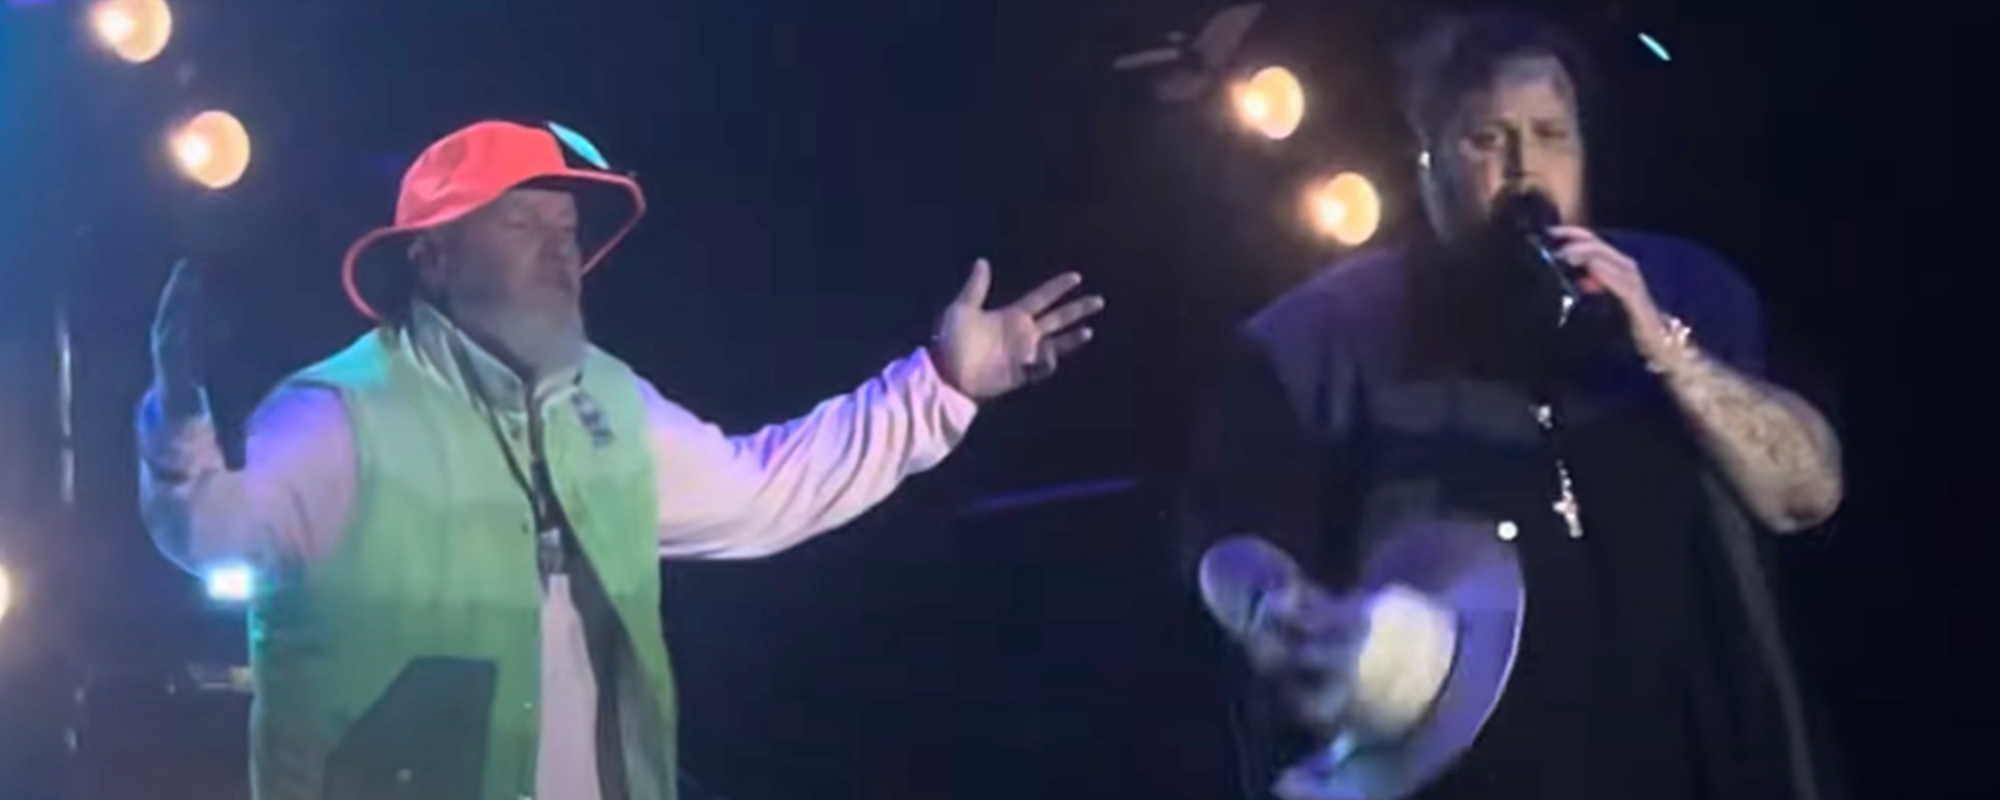 Watch as Fred Durst and Jelly Roll Deliver a Must-See Cover of the Who: Yes, You Read That Correctly